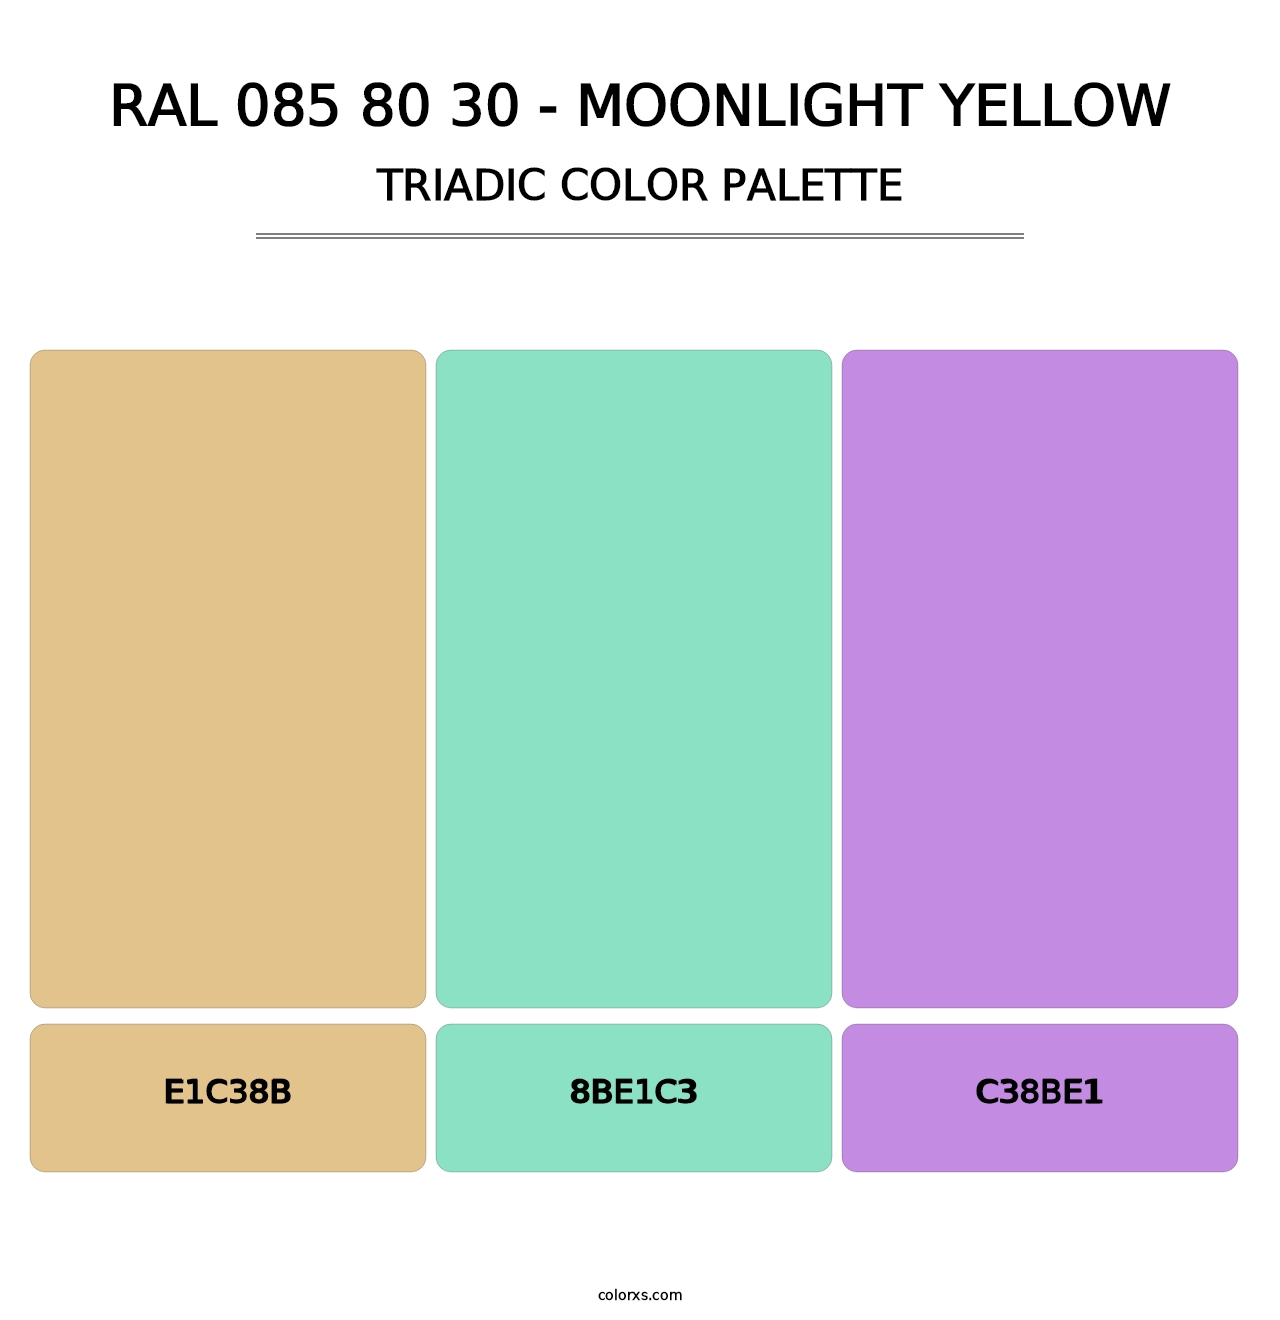 RAL 085 80 30 - Moonlight Yellow - Triadic Color Palette